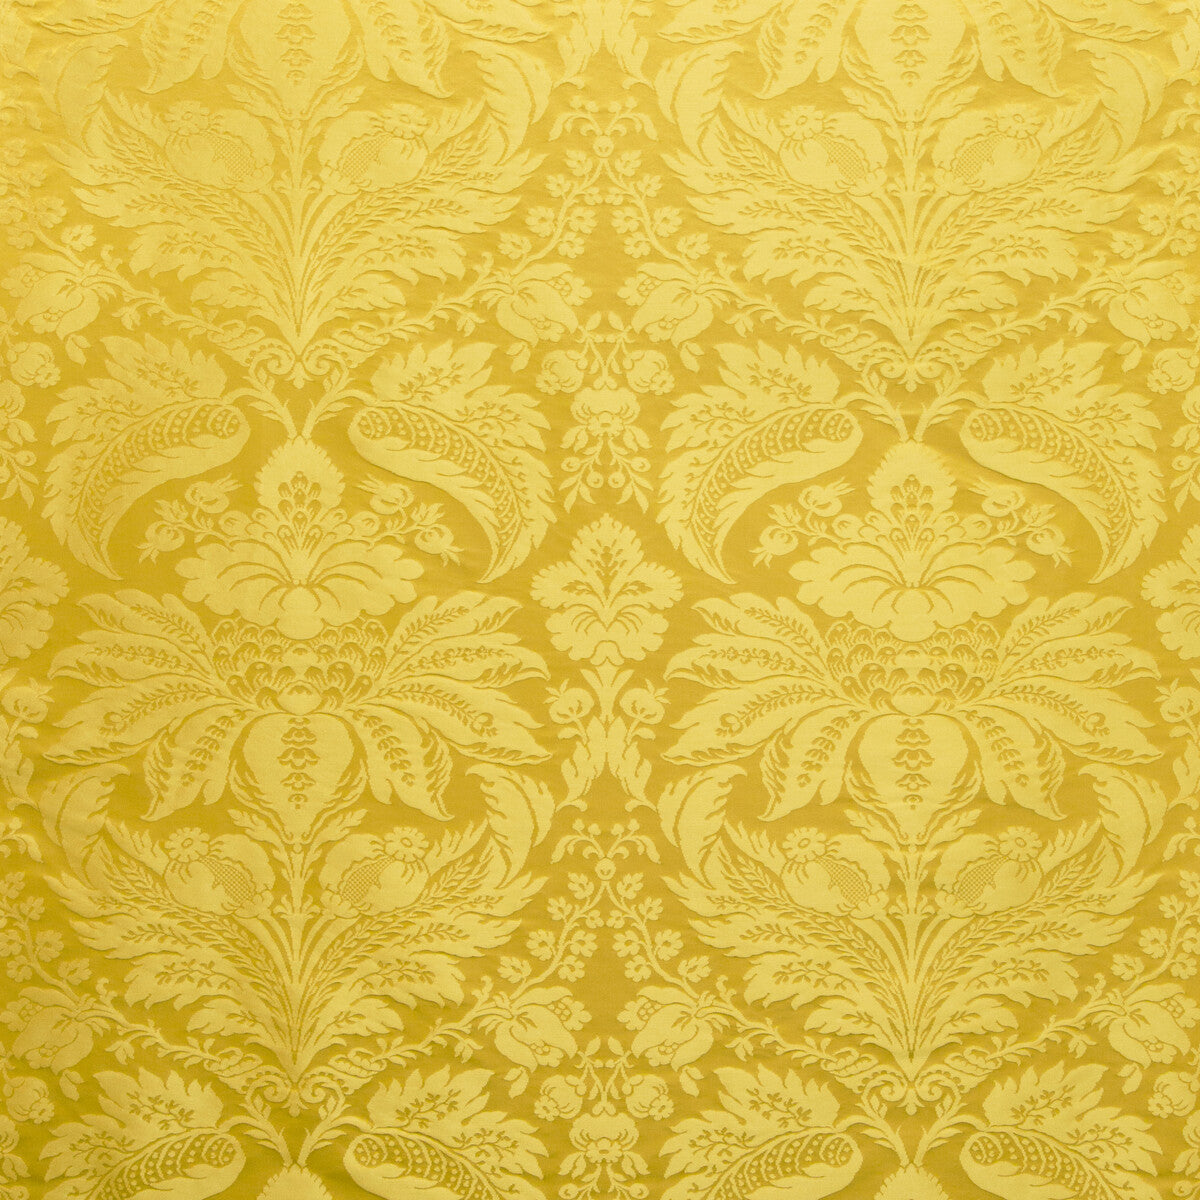 Damask Pierre fabric in canary color - pattern 8013188.4.0 - by Brunschwig &amp; Fils in the B&amp;F Showroom Exclusive 2019 collection